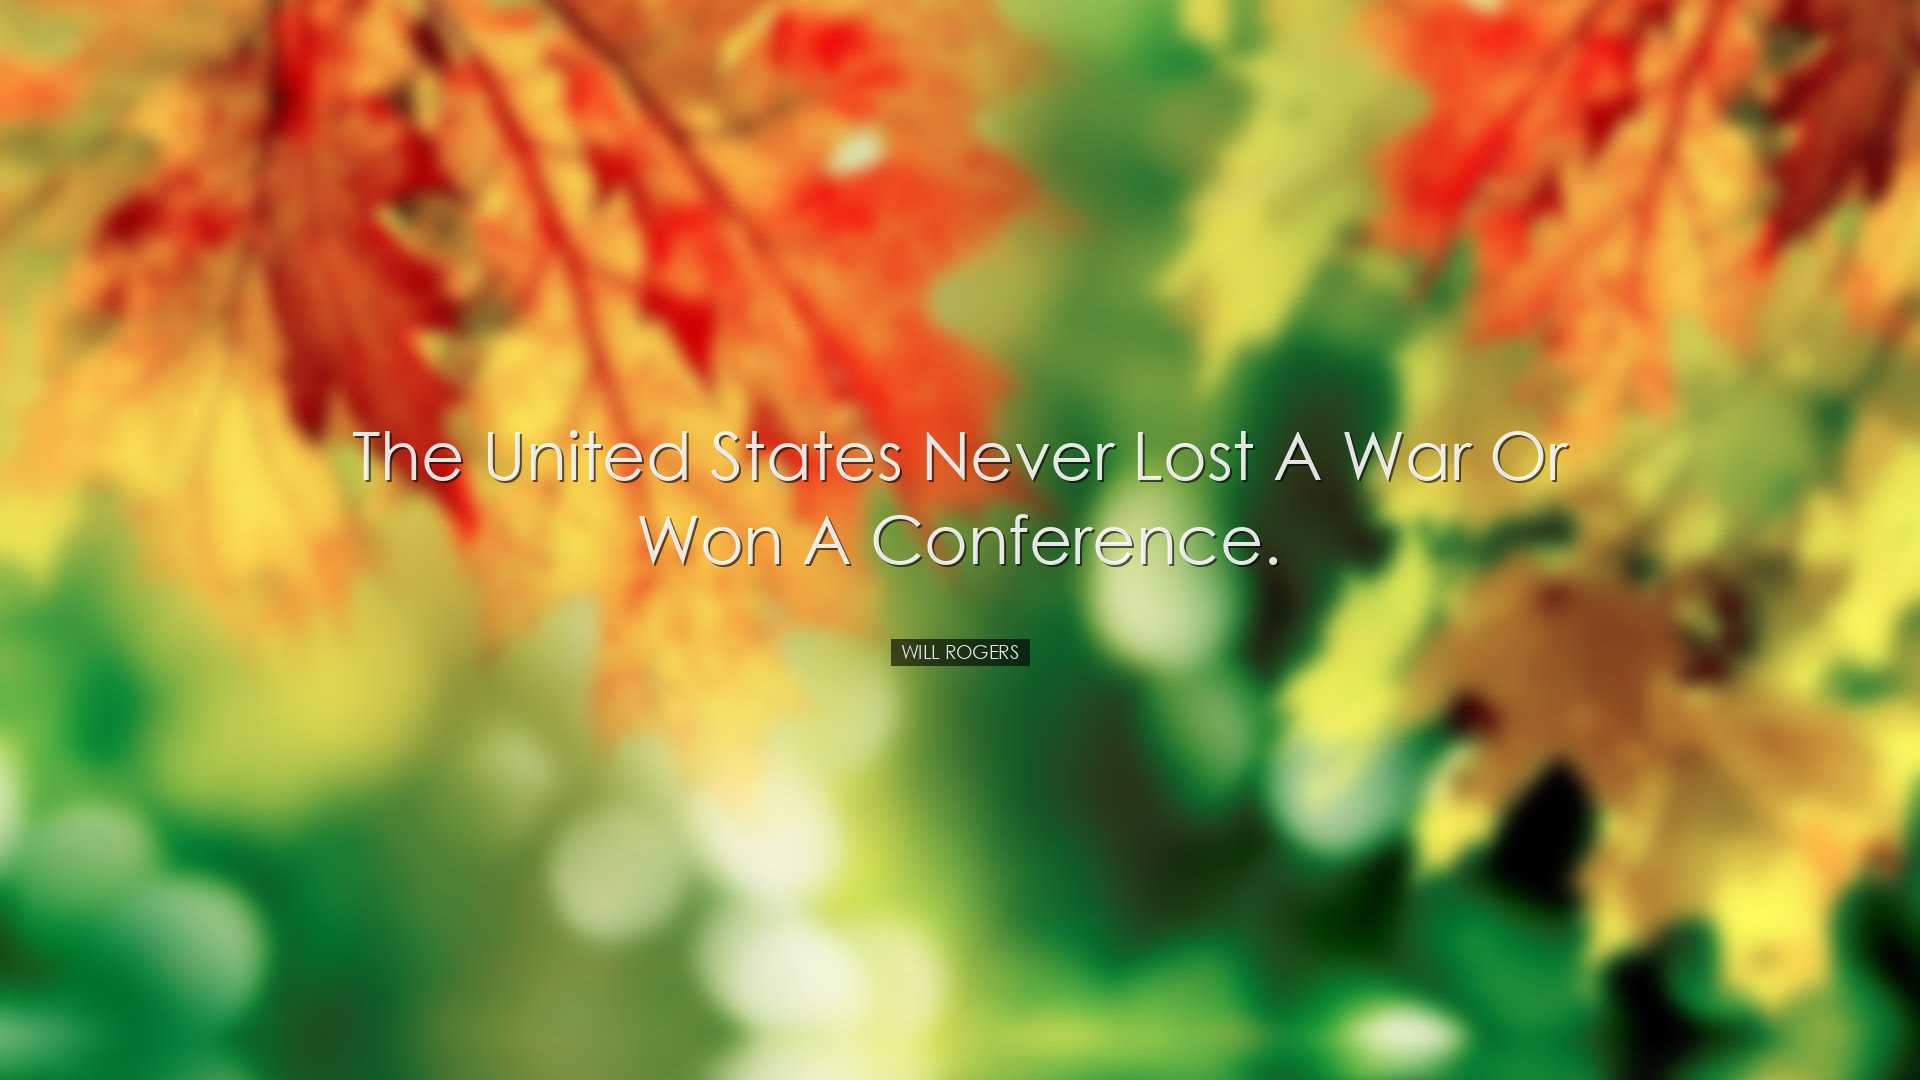 The United States never lost a war or won a conference. - Will Rog